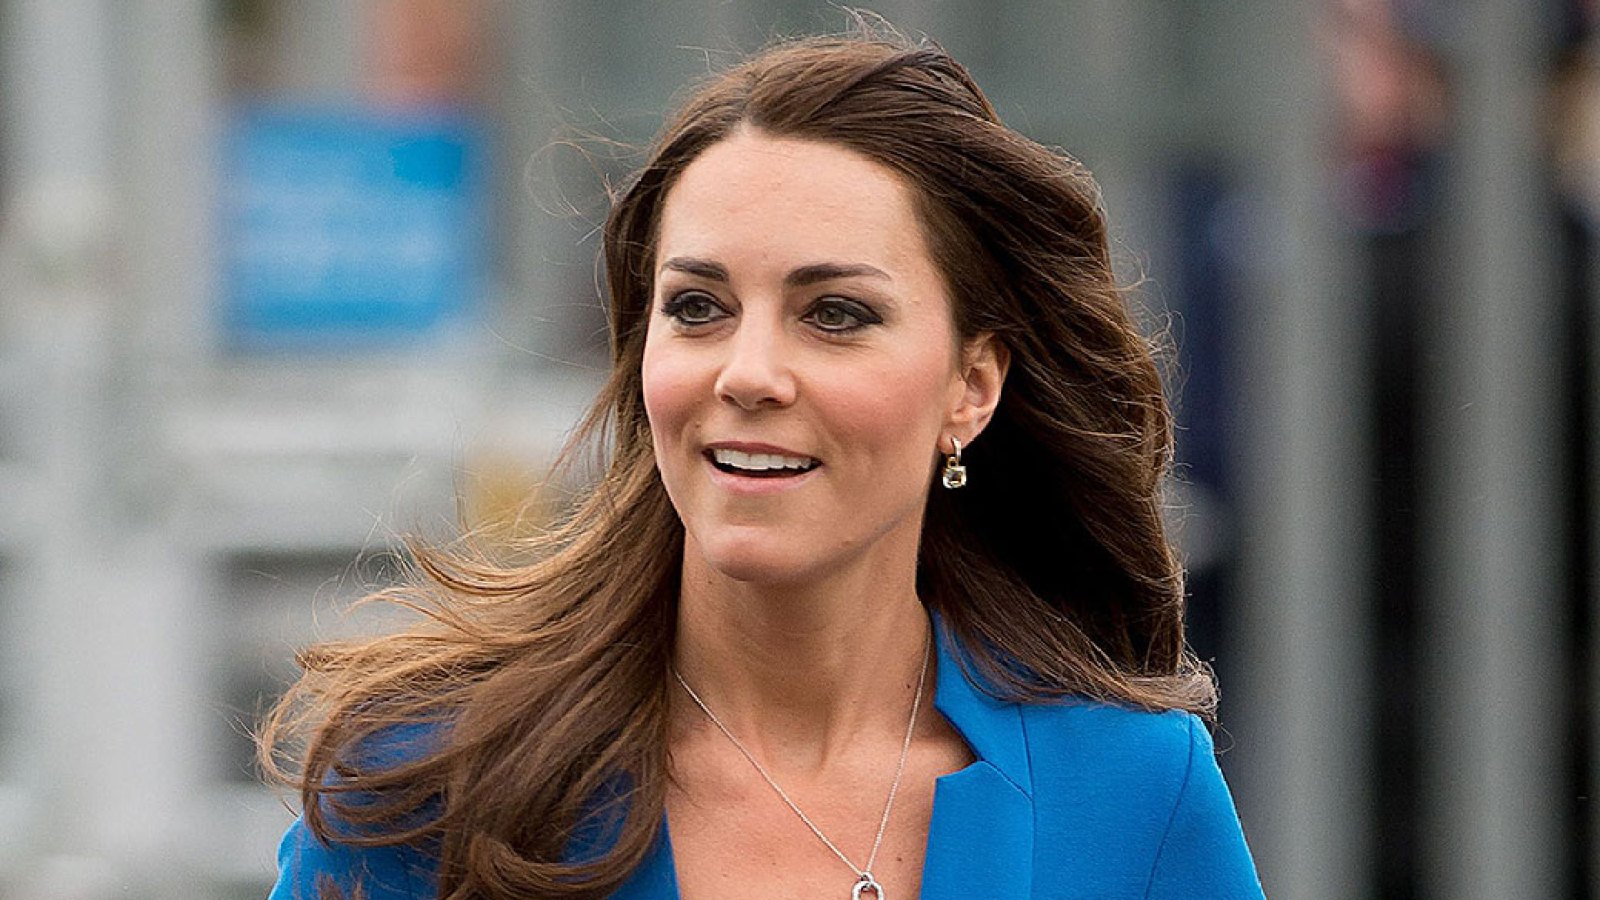 Kate Middleton’s Hair Is “A Little Overdone,” Princess Anne Was “Scary,” Says Former Royal Hairdresser Denise McAdam